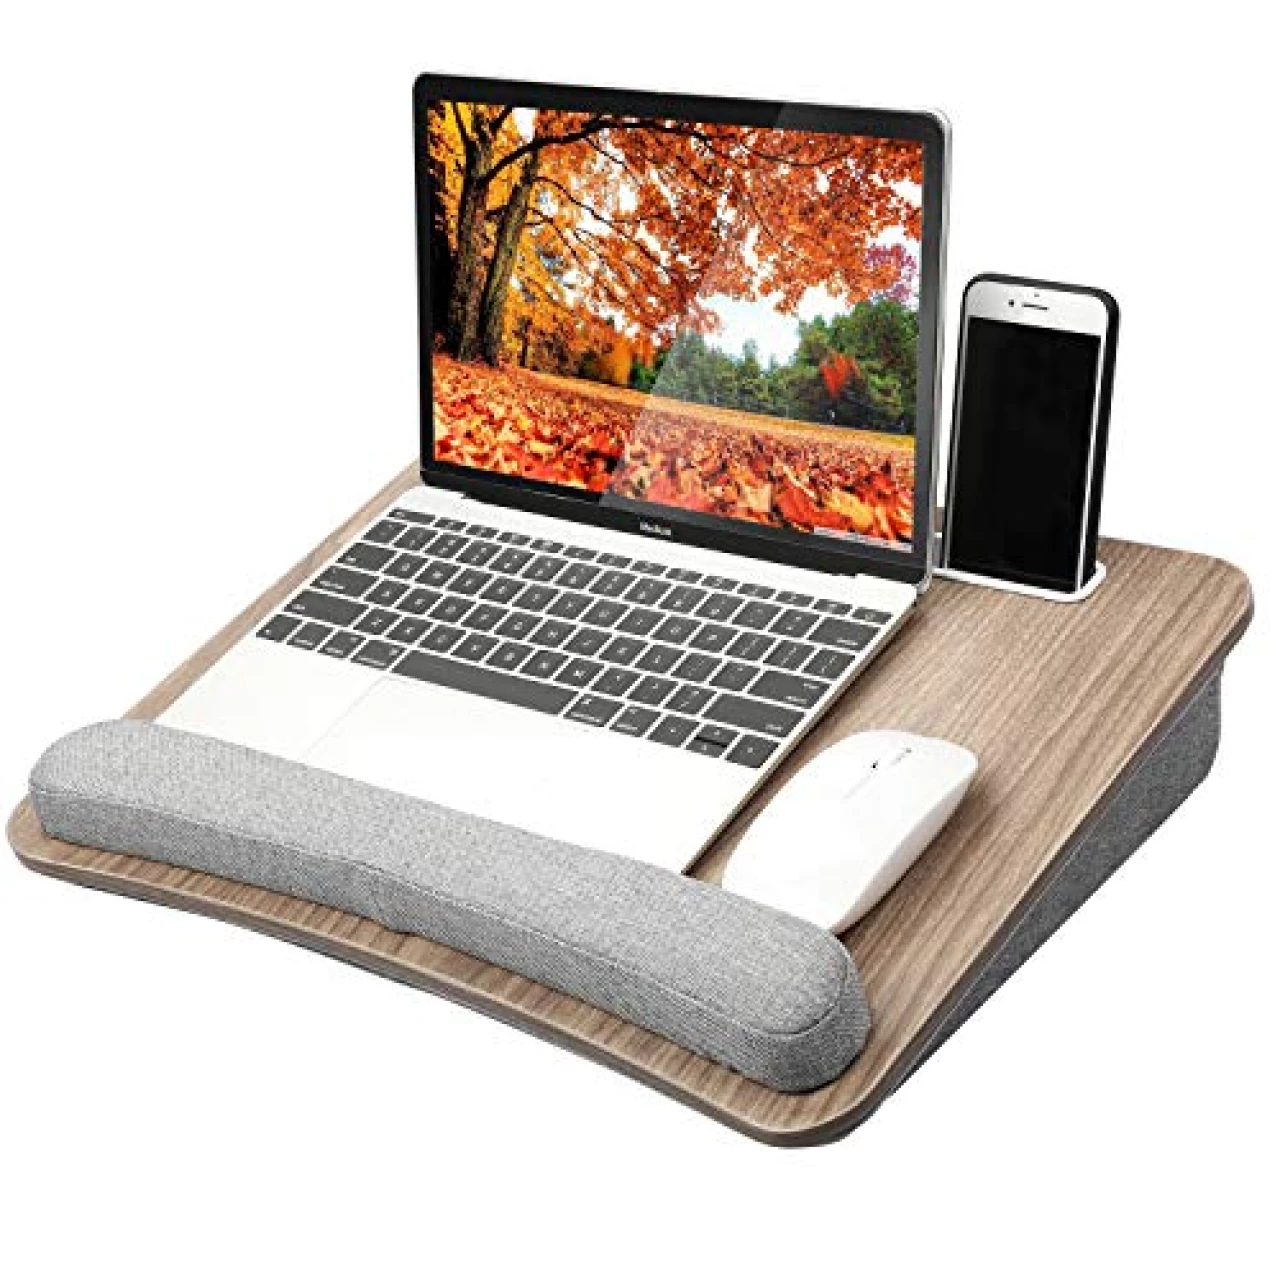 HUANUO Portable Lap Laptop Desk with Pillow Cushion, Fits up to 15.6 inch Laptop